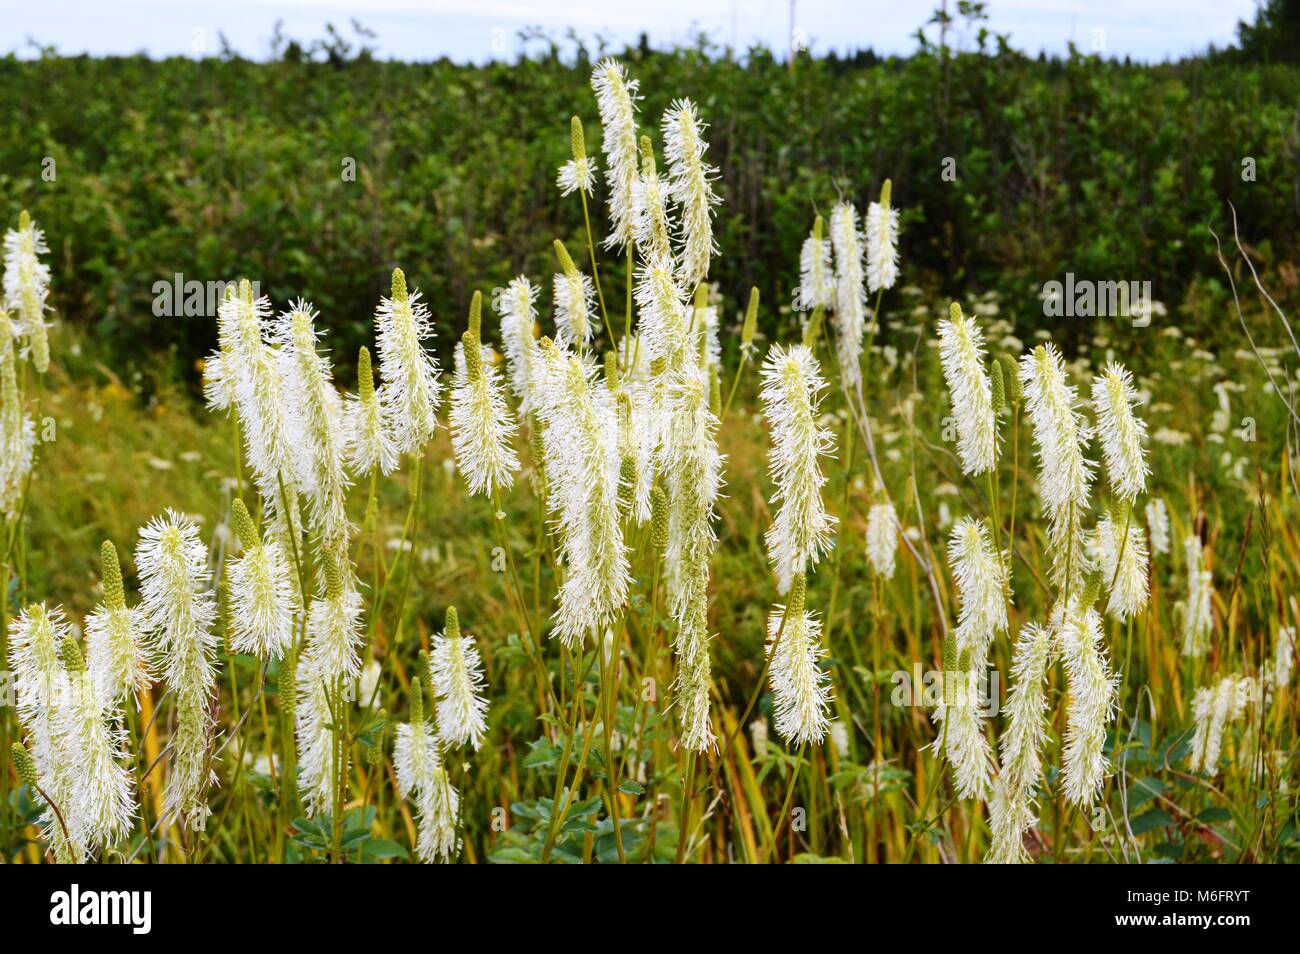 canadian burnet, culver*s root, Stock Photo